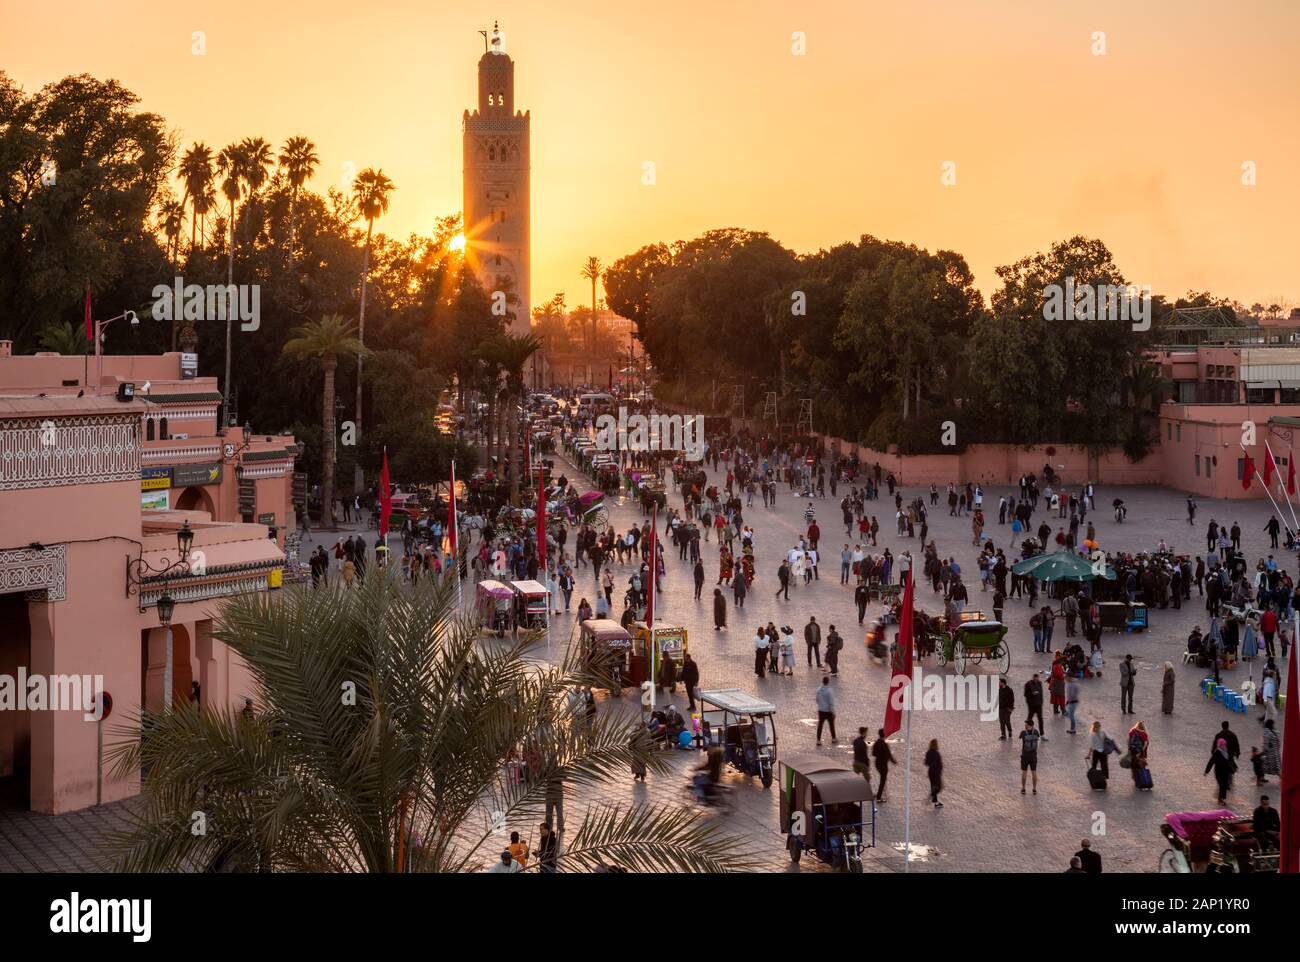 The Minaret of the Kasbah Mosque in the busy Jemaa el-Fnaa at sunset from a patio in Marrakesh, Marrakesh-Safi Morocco. Stock Photo